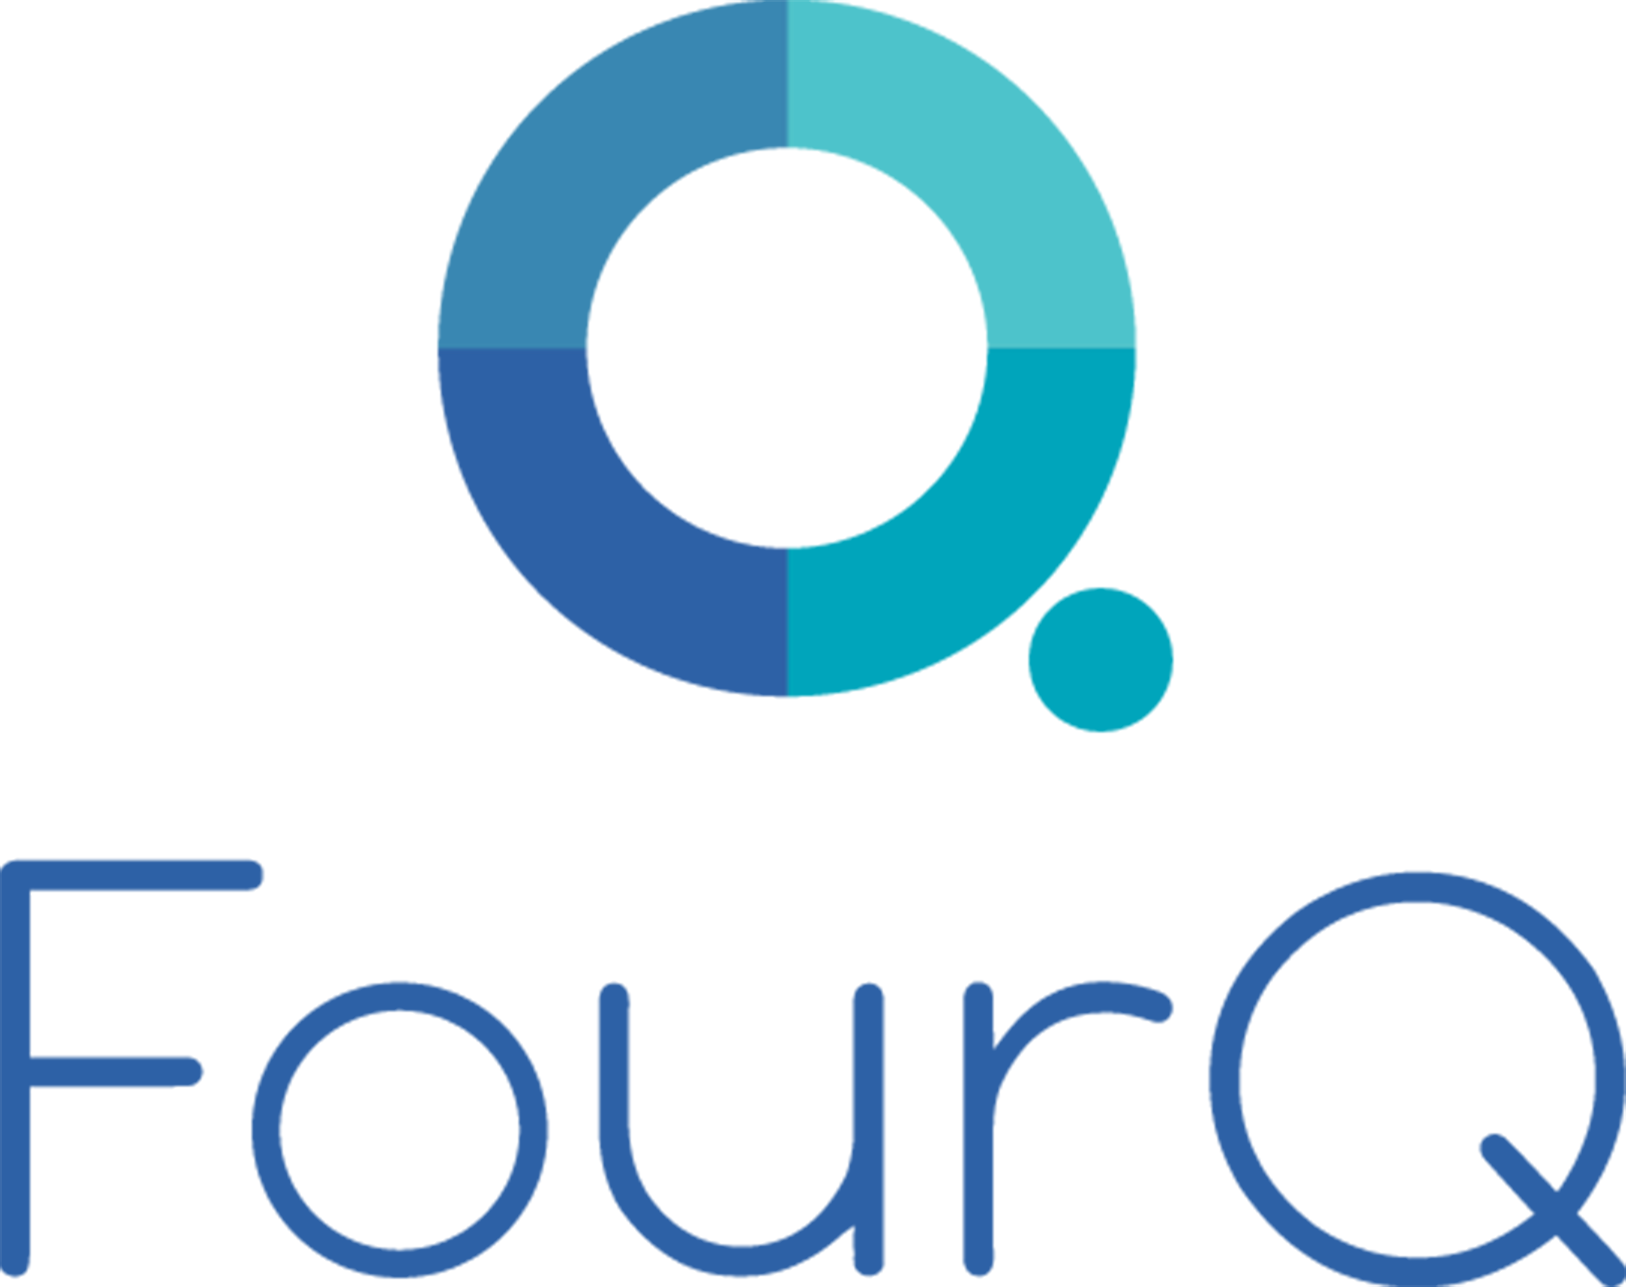 Paymaster Solution from FourQ Marries Intercompany with Global Vendor Invoice Management